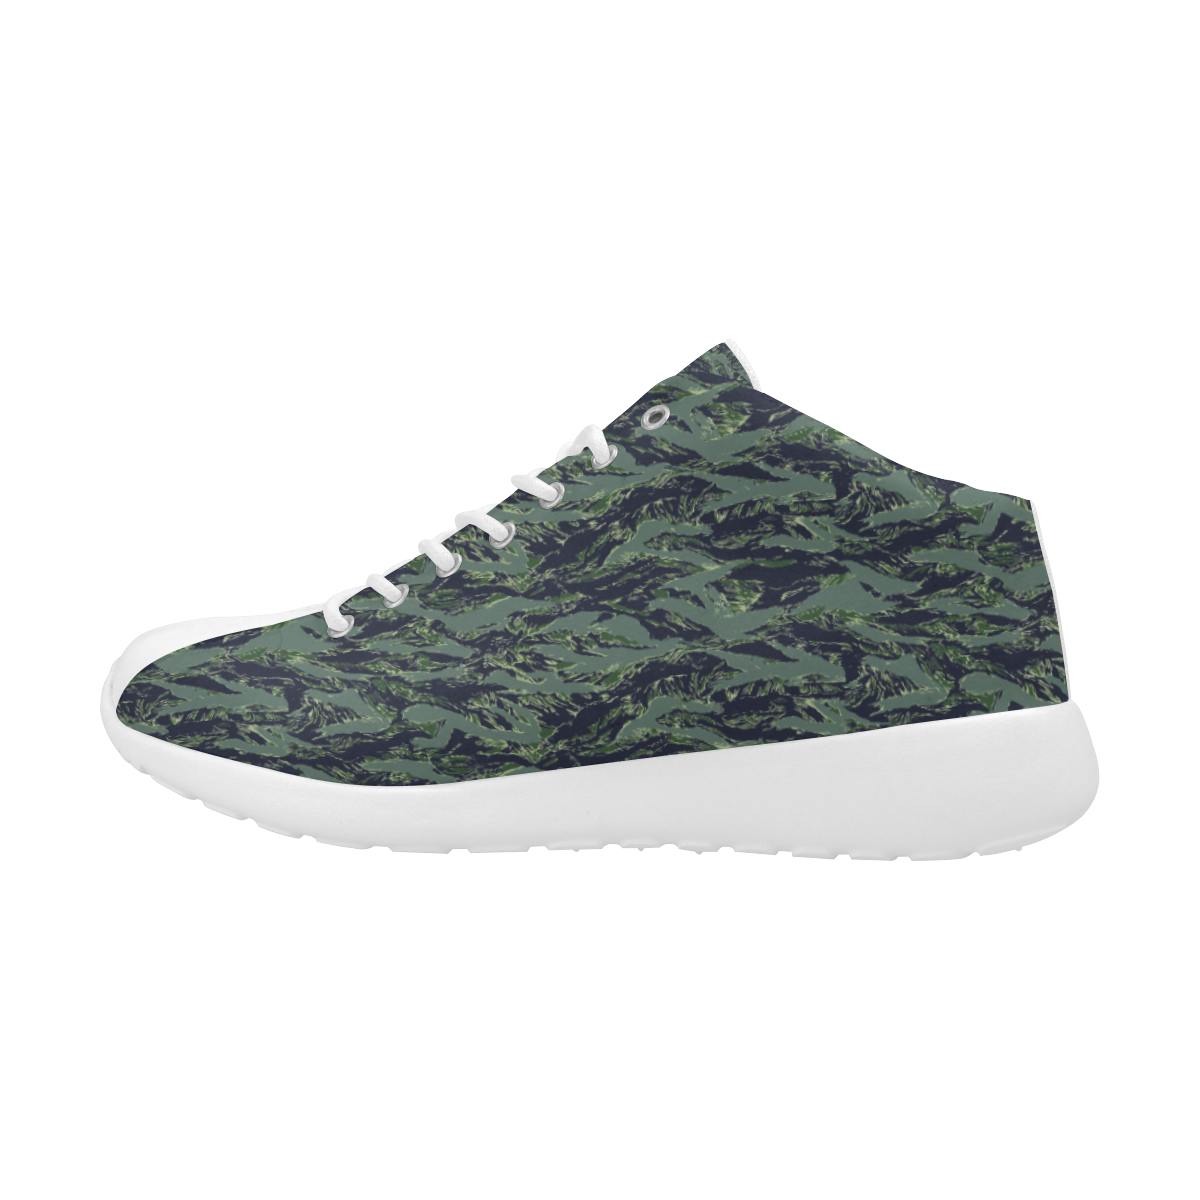 Jungle Tiger Stripe Green Camouflage Women's Basketball Training Shoes/Large Size (Model 47502)